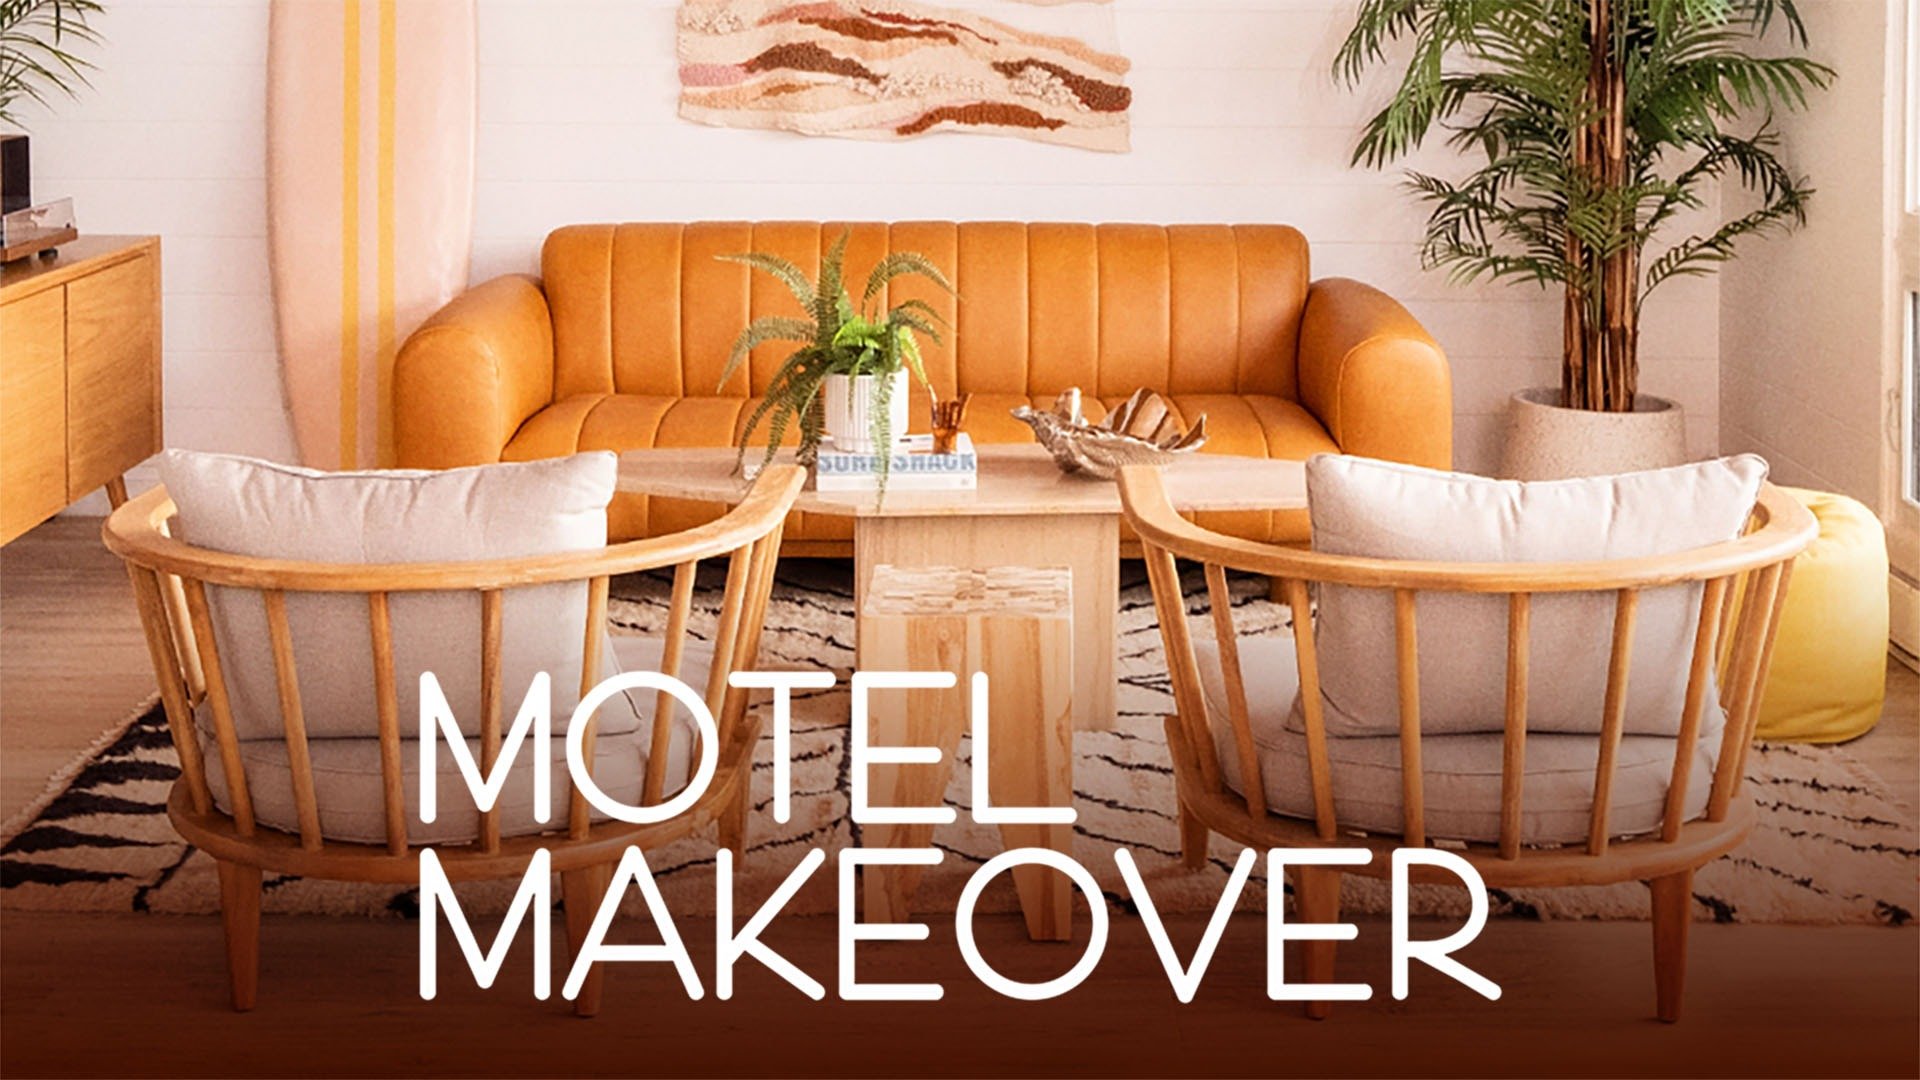 Makeover motel Who is